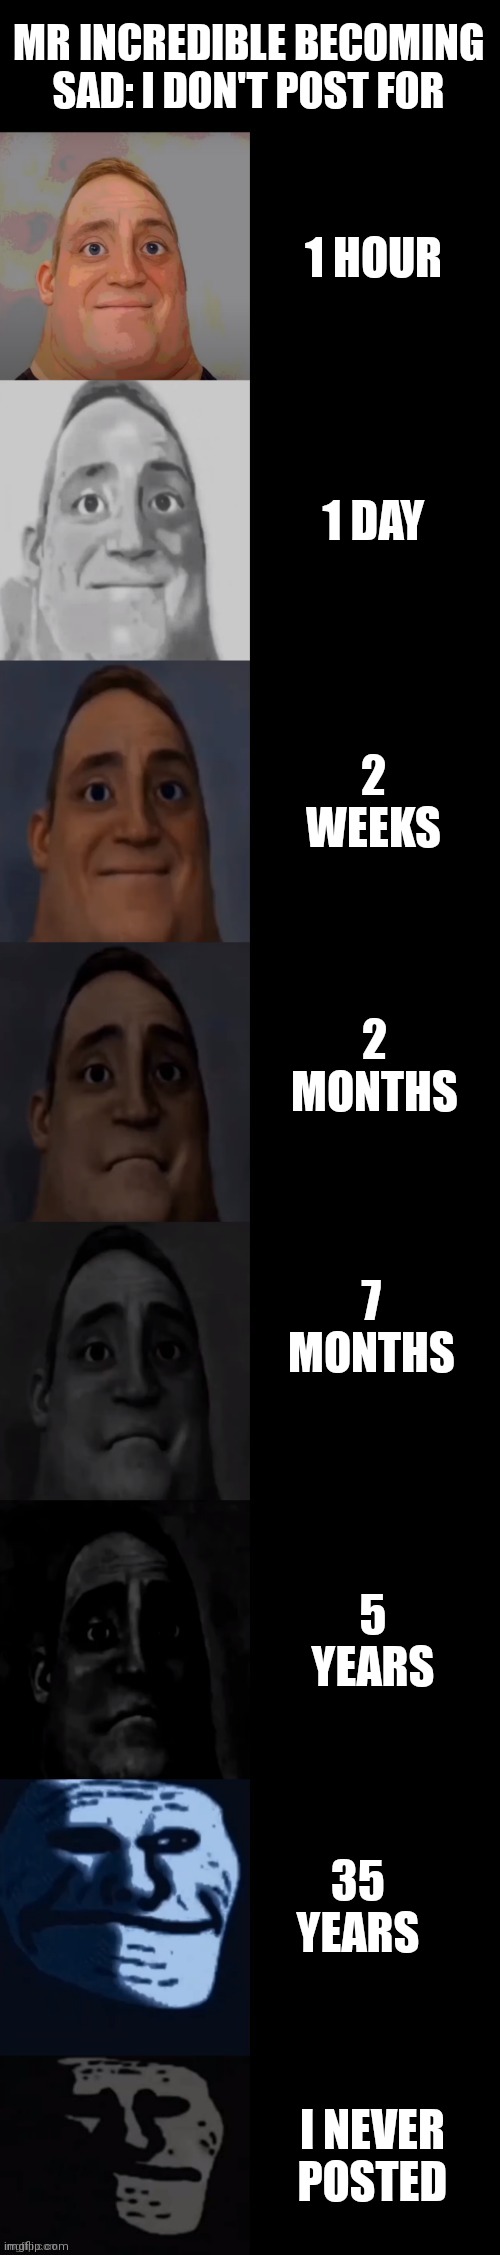 Mr incredible becoming Sad: I don't Post For | MR INCREDIBLE BECOMING SAD: I DON'T POST FOR; 1 HOUR; 1 DAY; 2 WEEKS; 2 MONTHS; 7 MONTHS; 5 YEARS; 35 YEARS; I NEVER POSTED | image tagged in mr incredible becoming sad | made w/ Imgflip meme maker